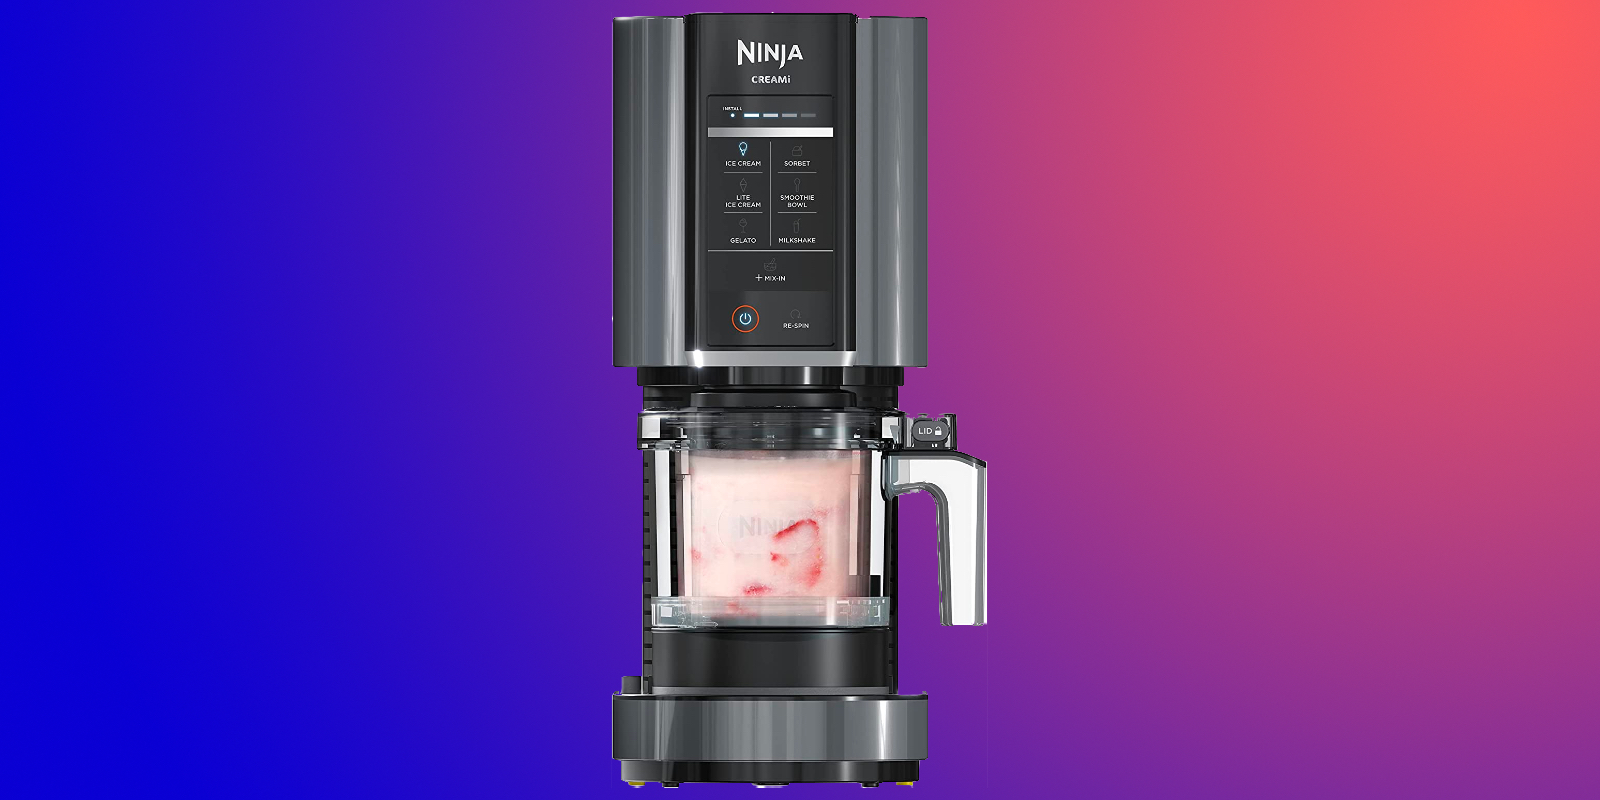 Ninja's CREAMi ice cream maker hits one of its best prices yet at $100  (Orig. $200, Refurb)